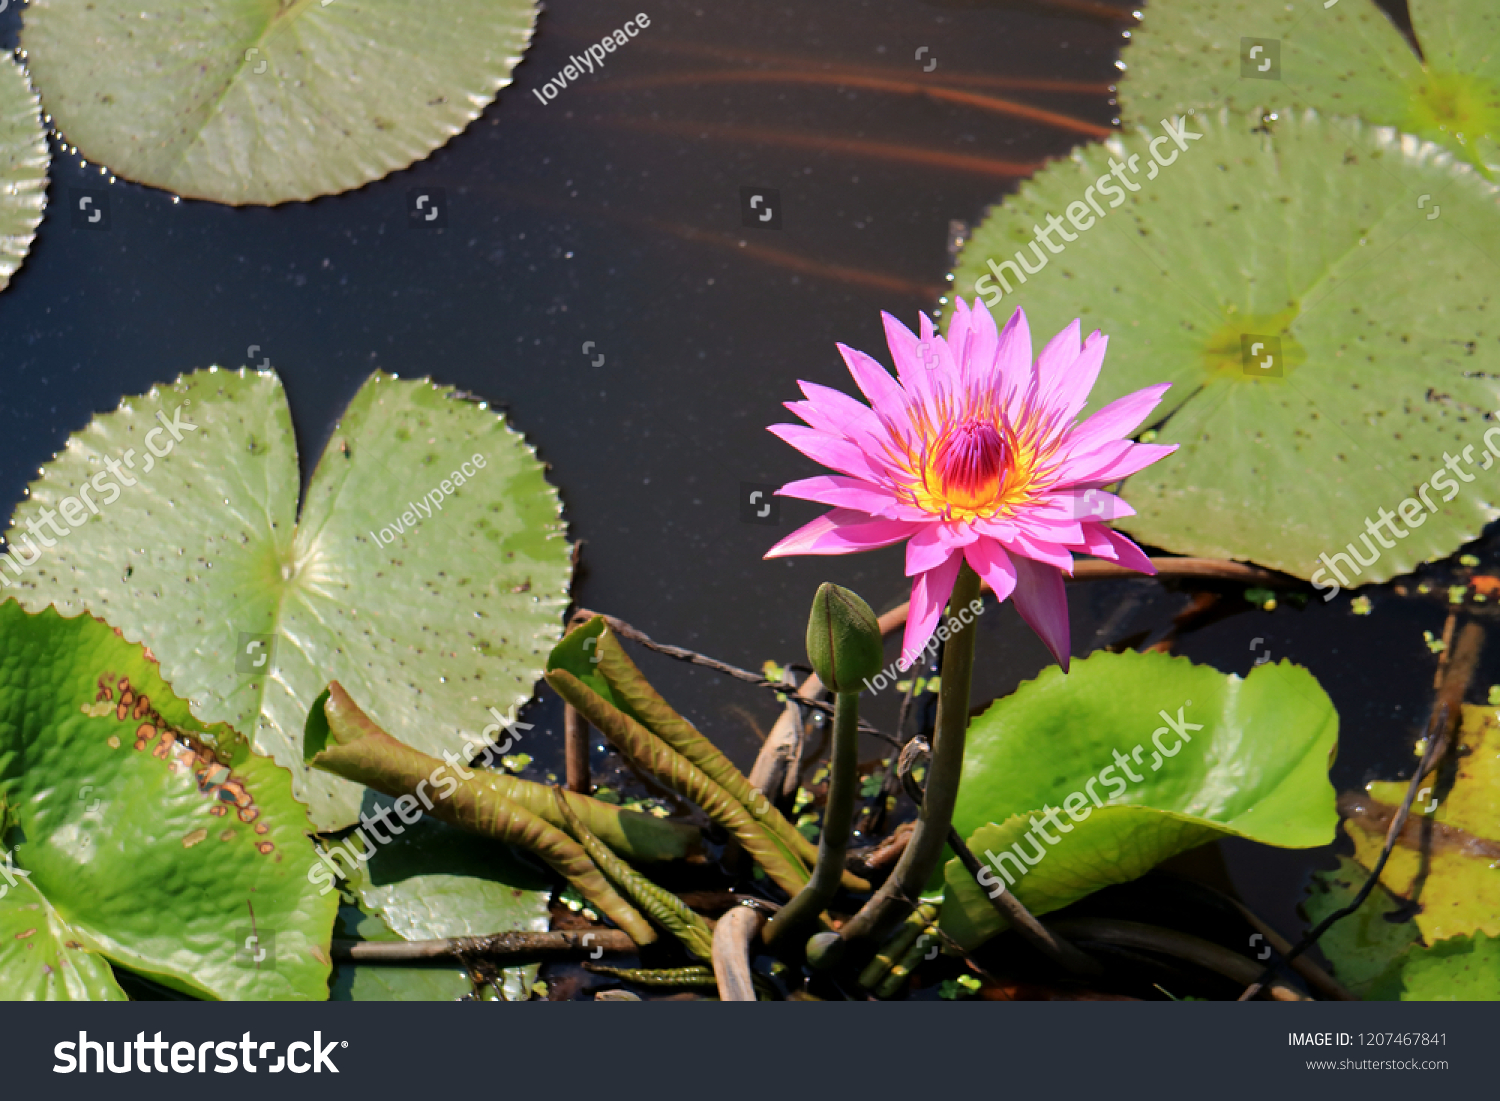 Vibrant Pink Blooming Lotus Flower with a Green Flower Bud in the Morning Sunlight #1207467841